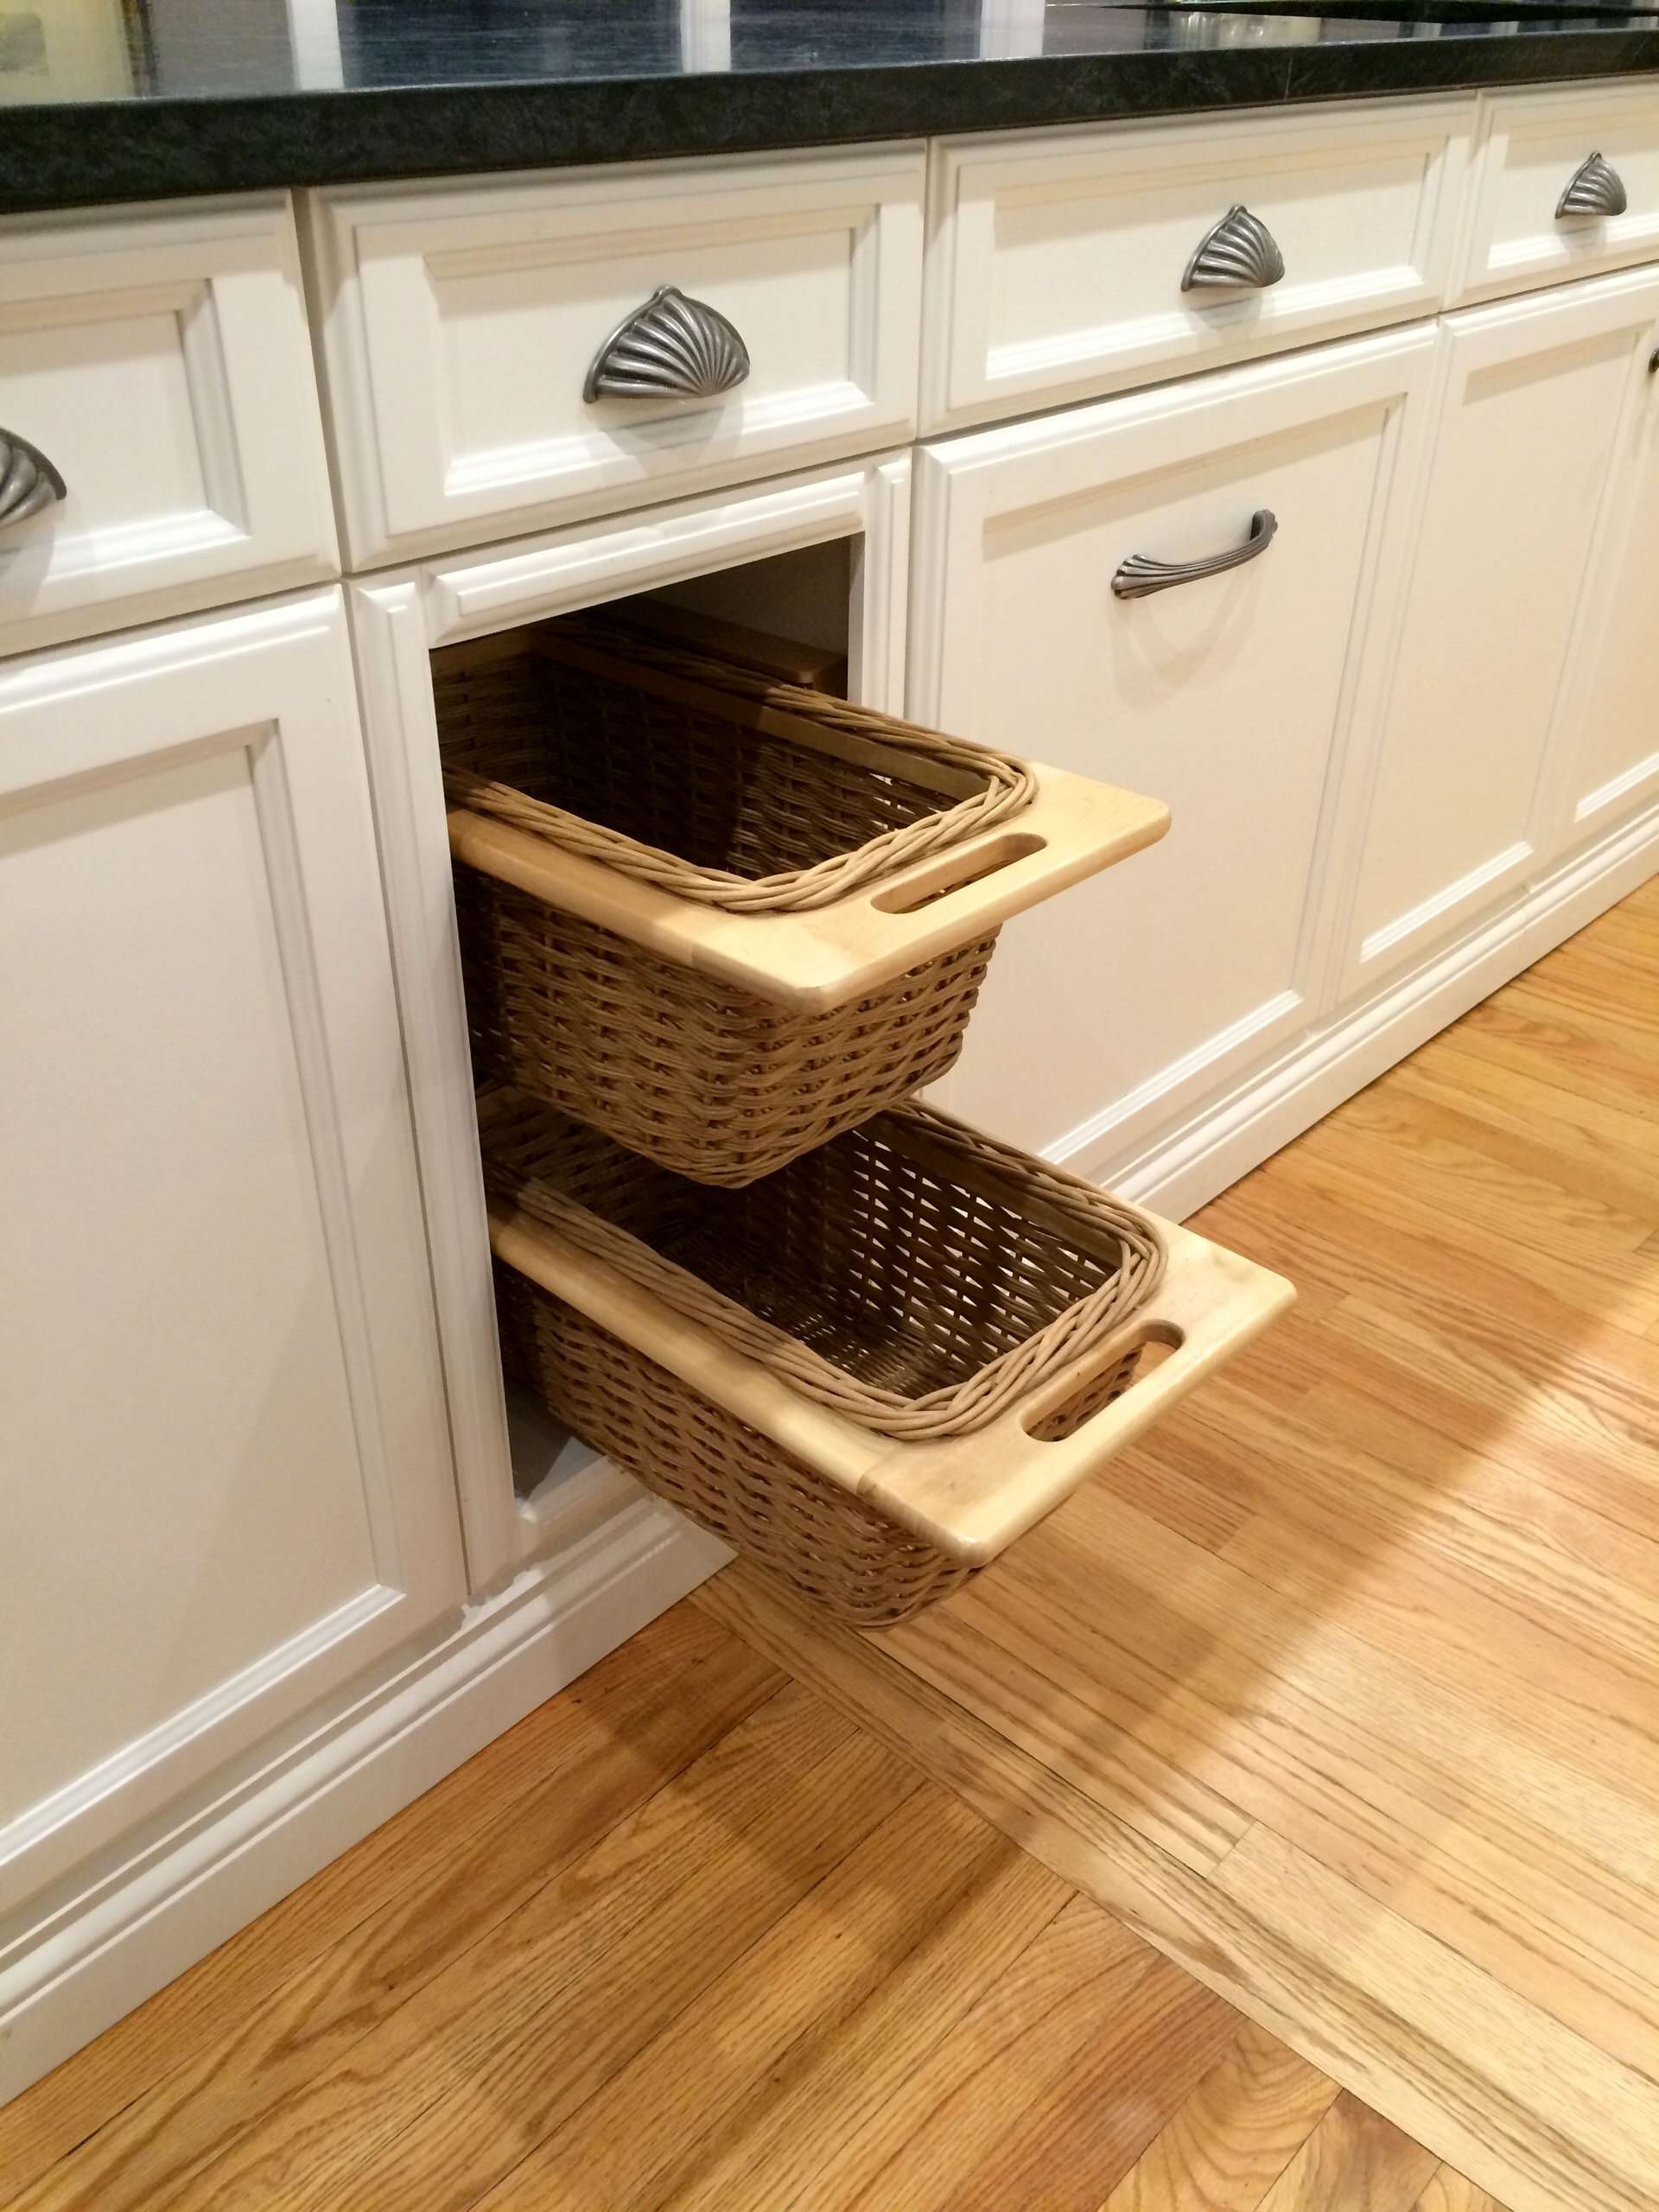 Vegetable Rack with Slide Out Trays